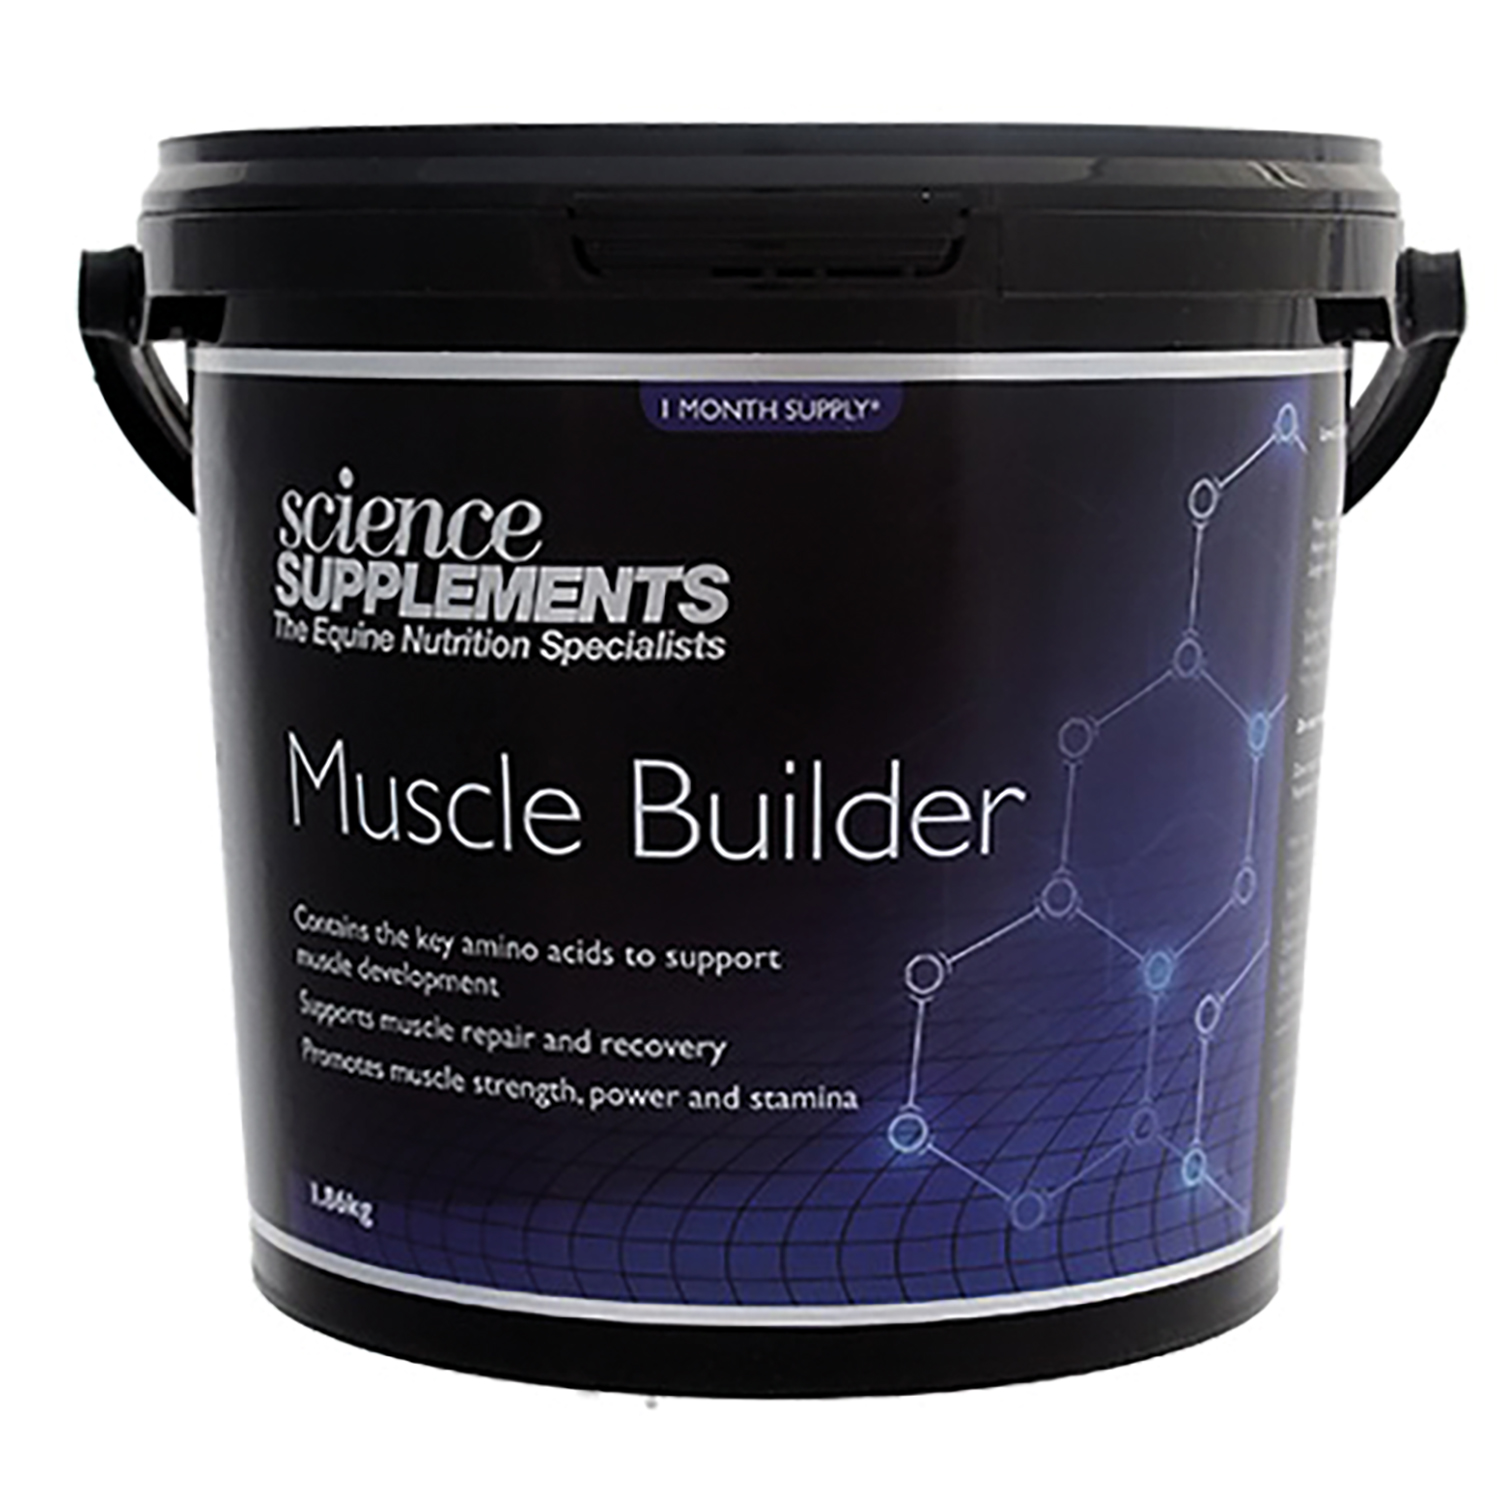 SCIENCE SUPPLEMENTS MUSCLE BUILDER 830 GM 830 GM